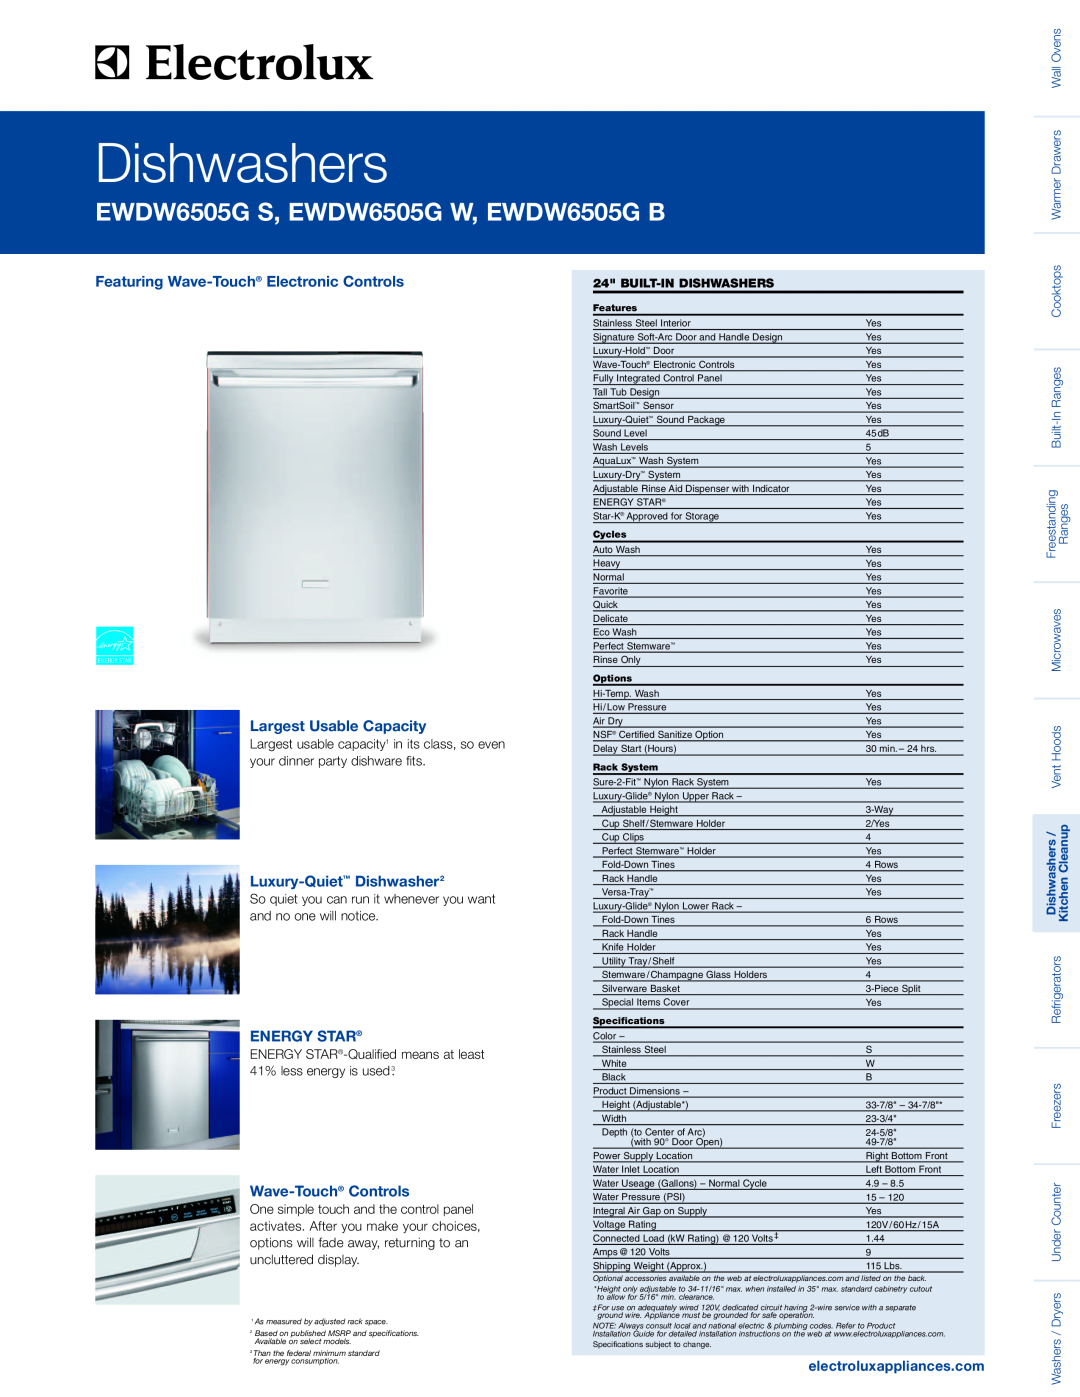 Electrolux EWDW6505GW specifications Featuring Wave-Touch Electronic Controls Largest Usable Capacity, Energy Star 